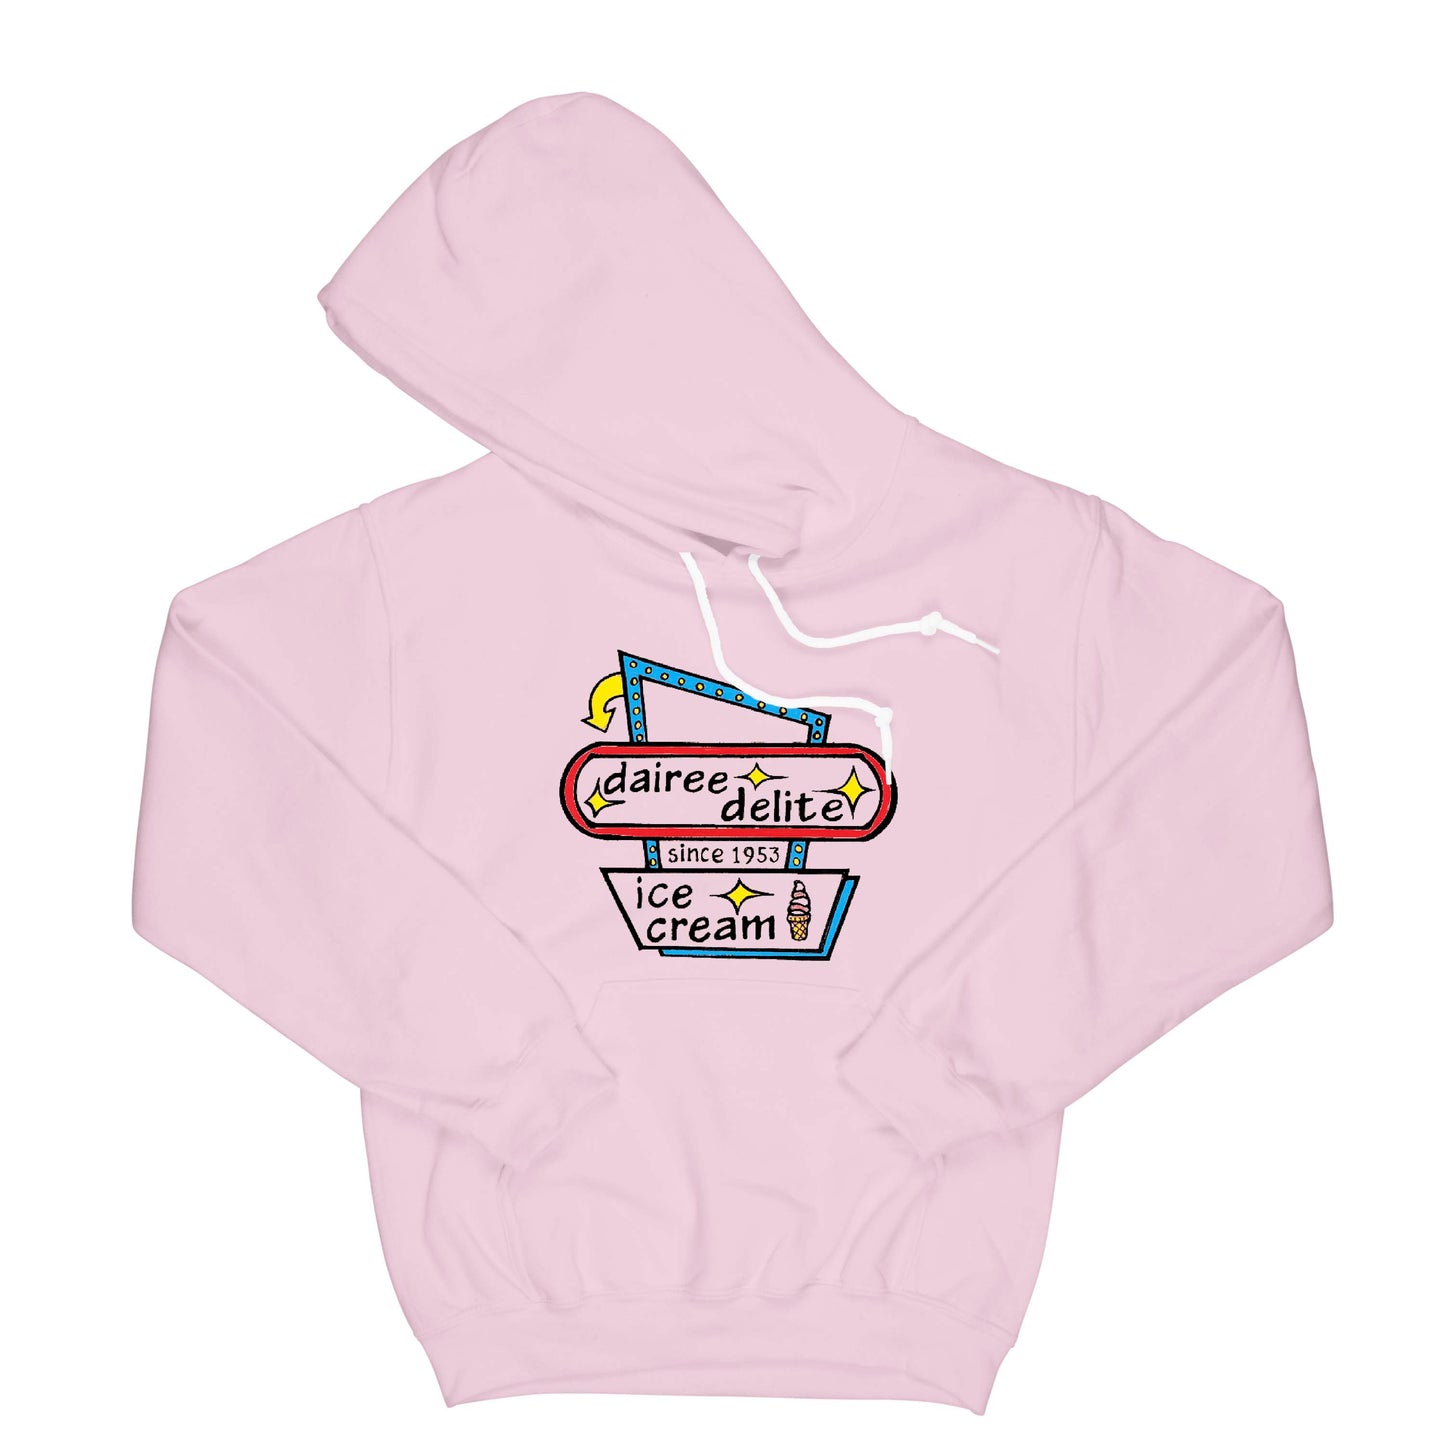 Dairee Delite 70th Anniversary Retro Sign 2 Hoodie Small Light Pink